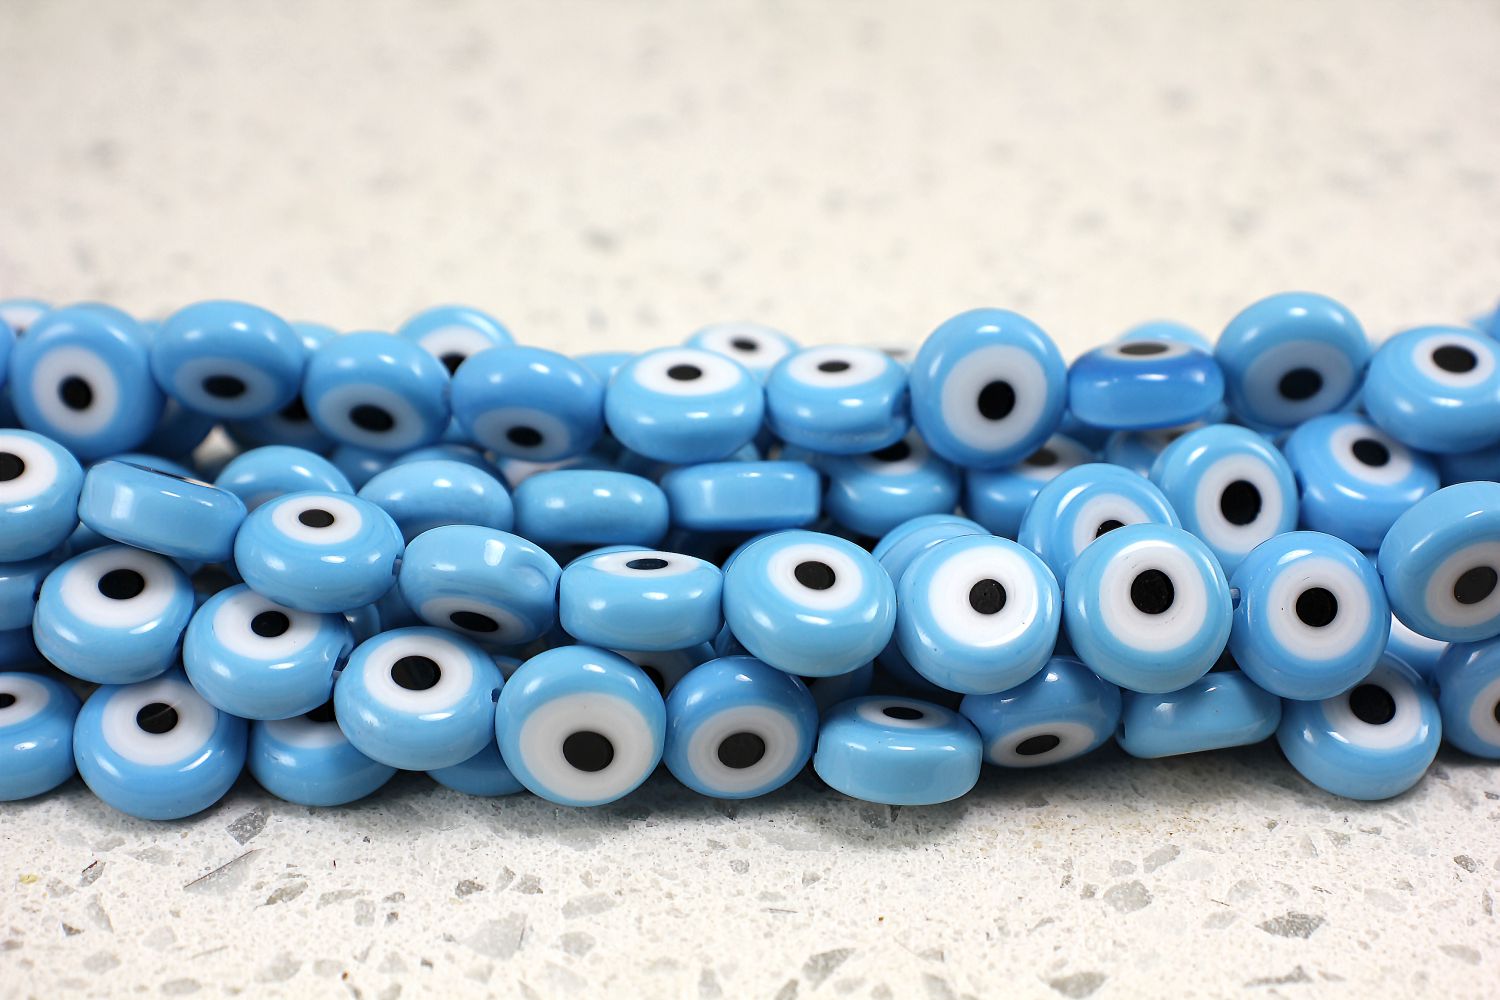 10 mm Turquoise Spray Painted Glass Bead